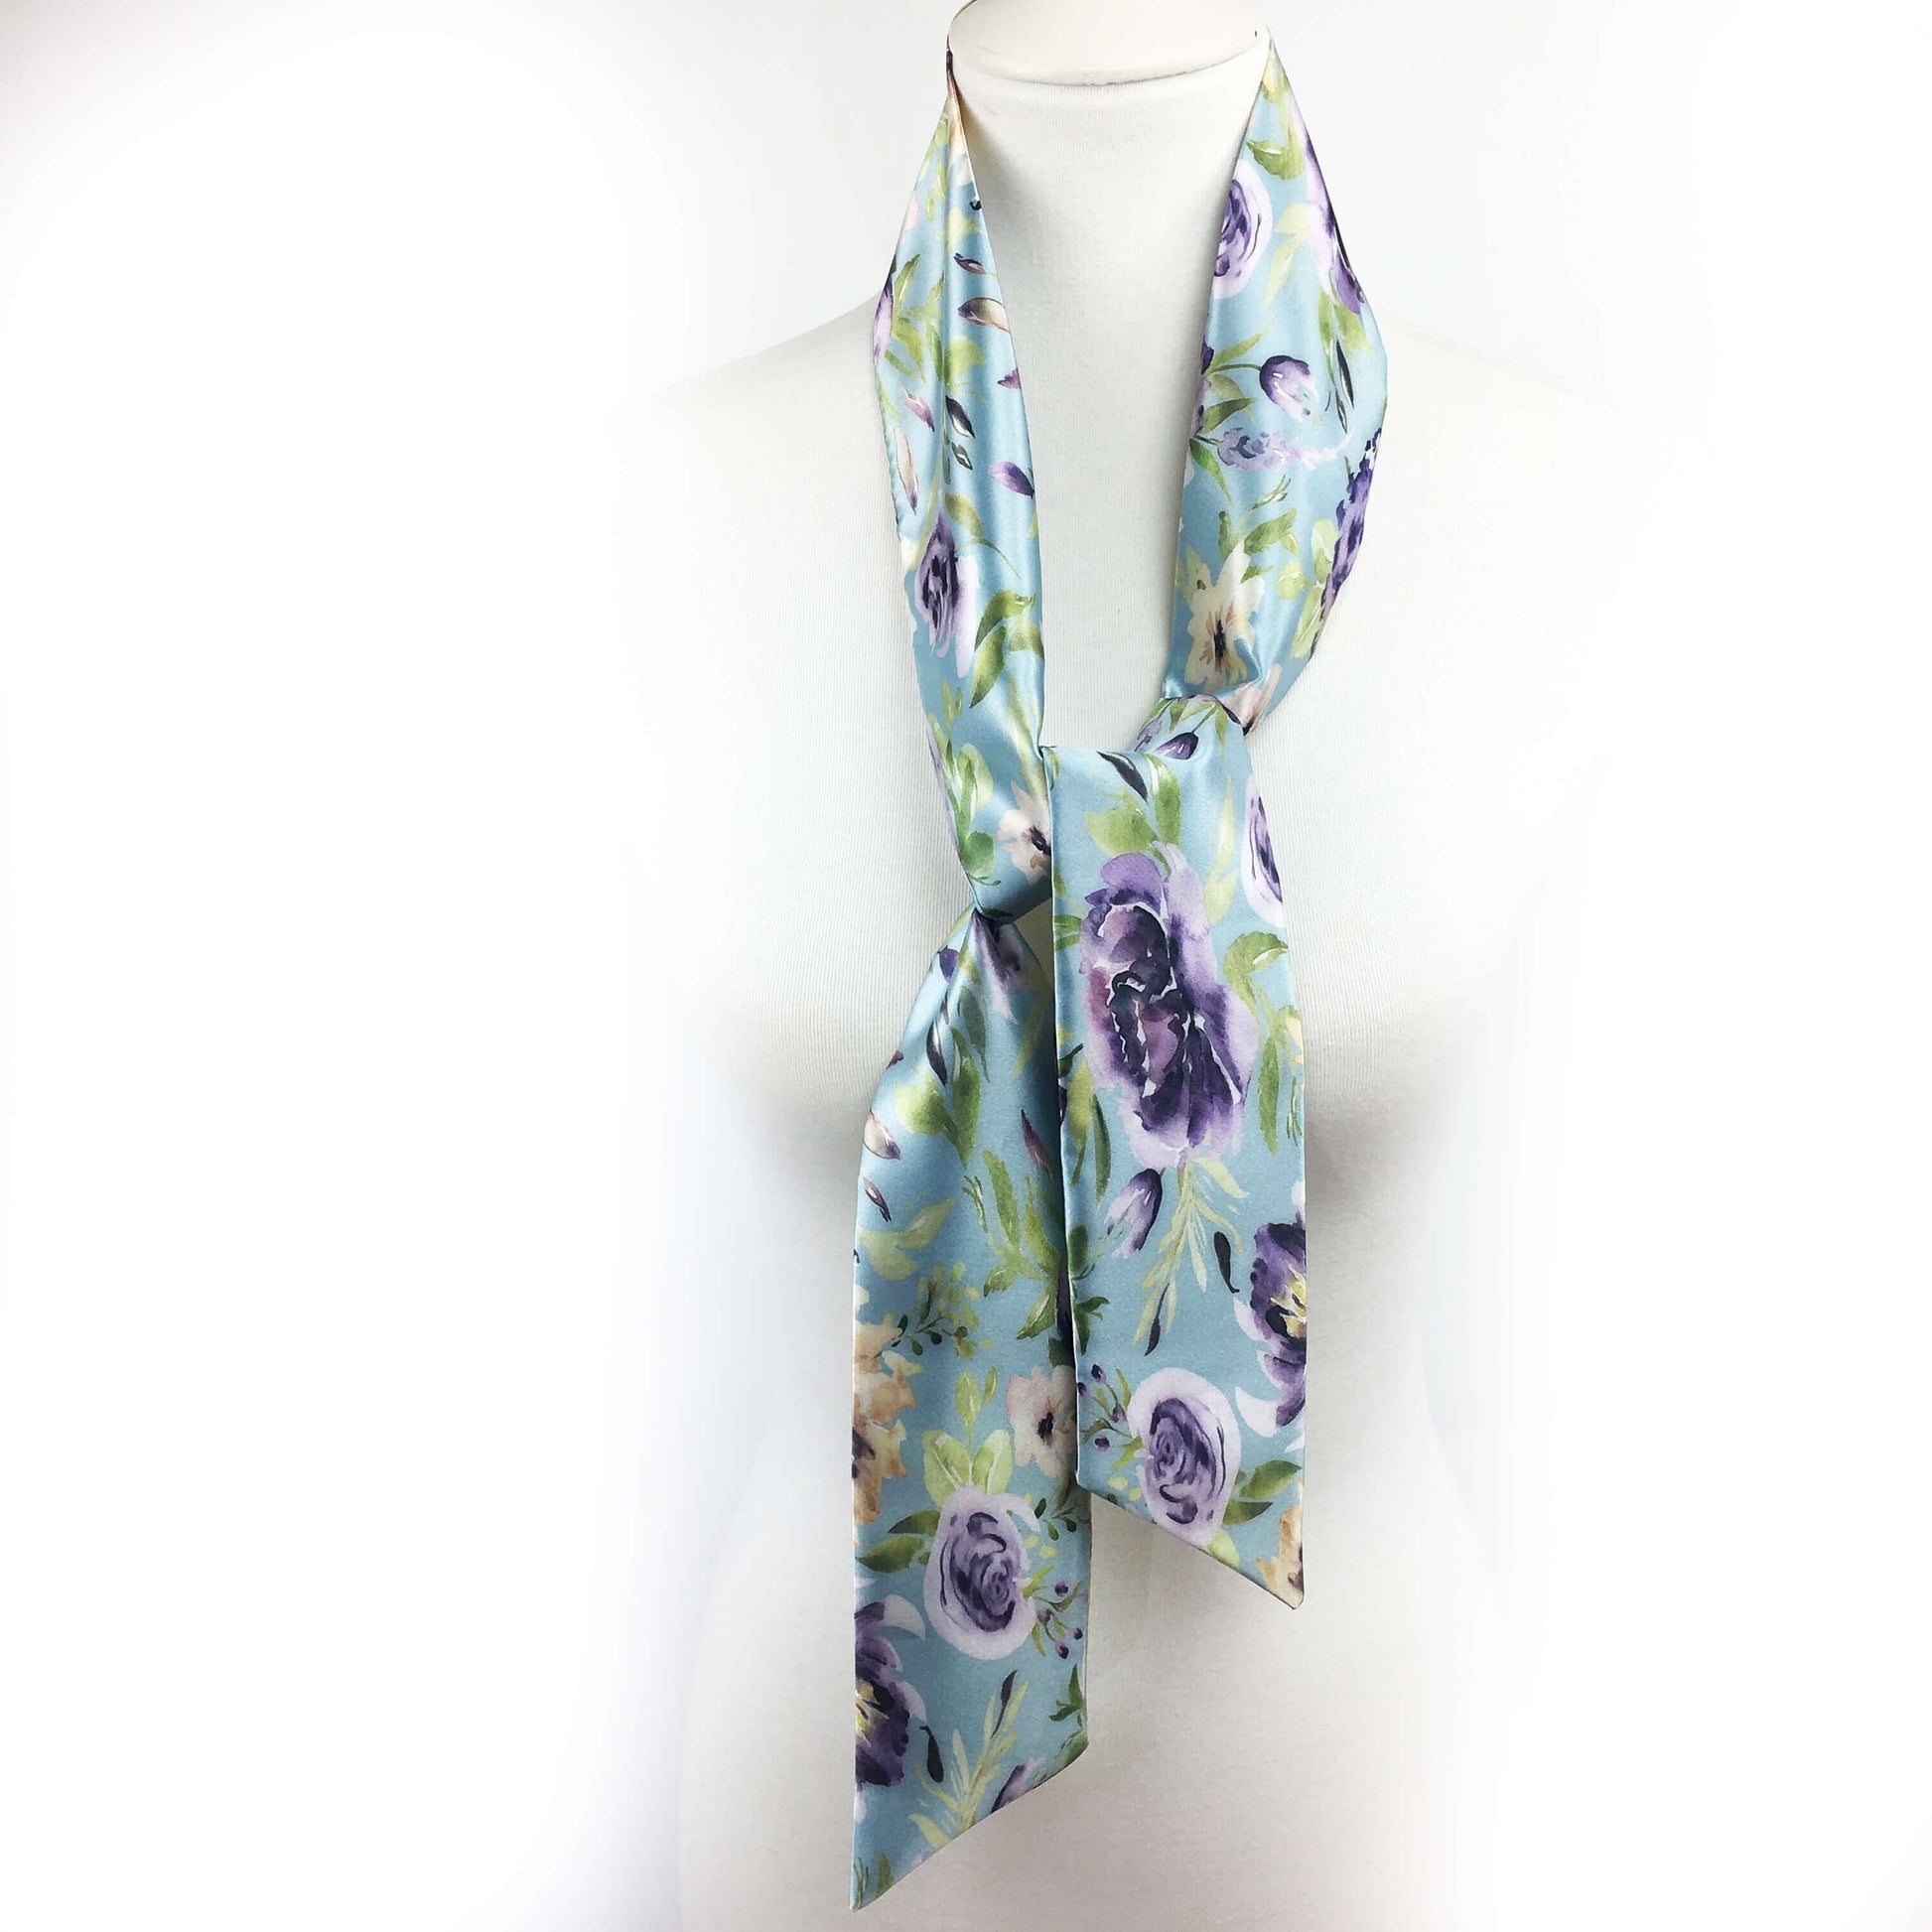 Mixed Watercolor Turquoise,Skinny Scarf,Woman Scarf,All season scarf,LightweightScarf,ladies scarf,artist scarf,painted scarf,satin scarf